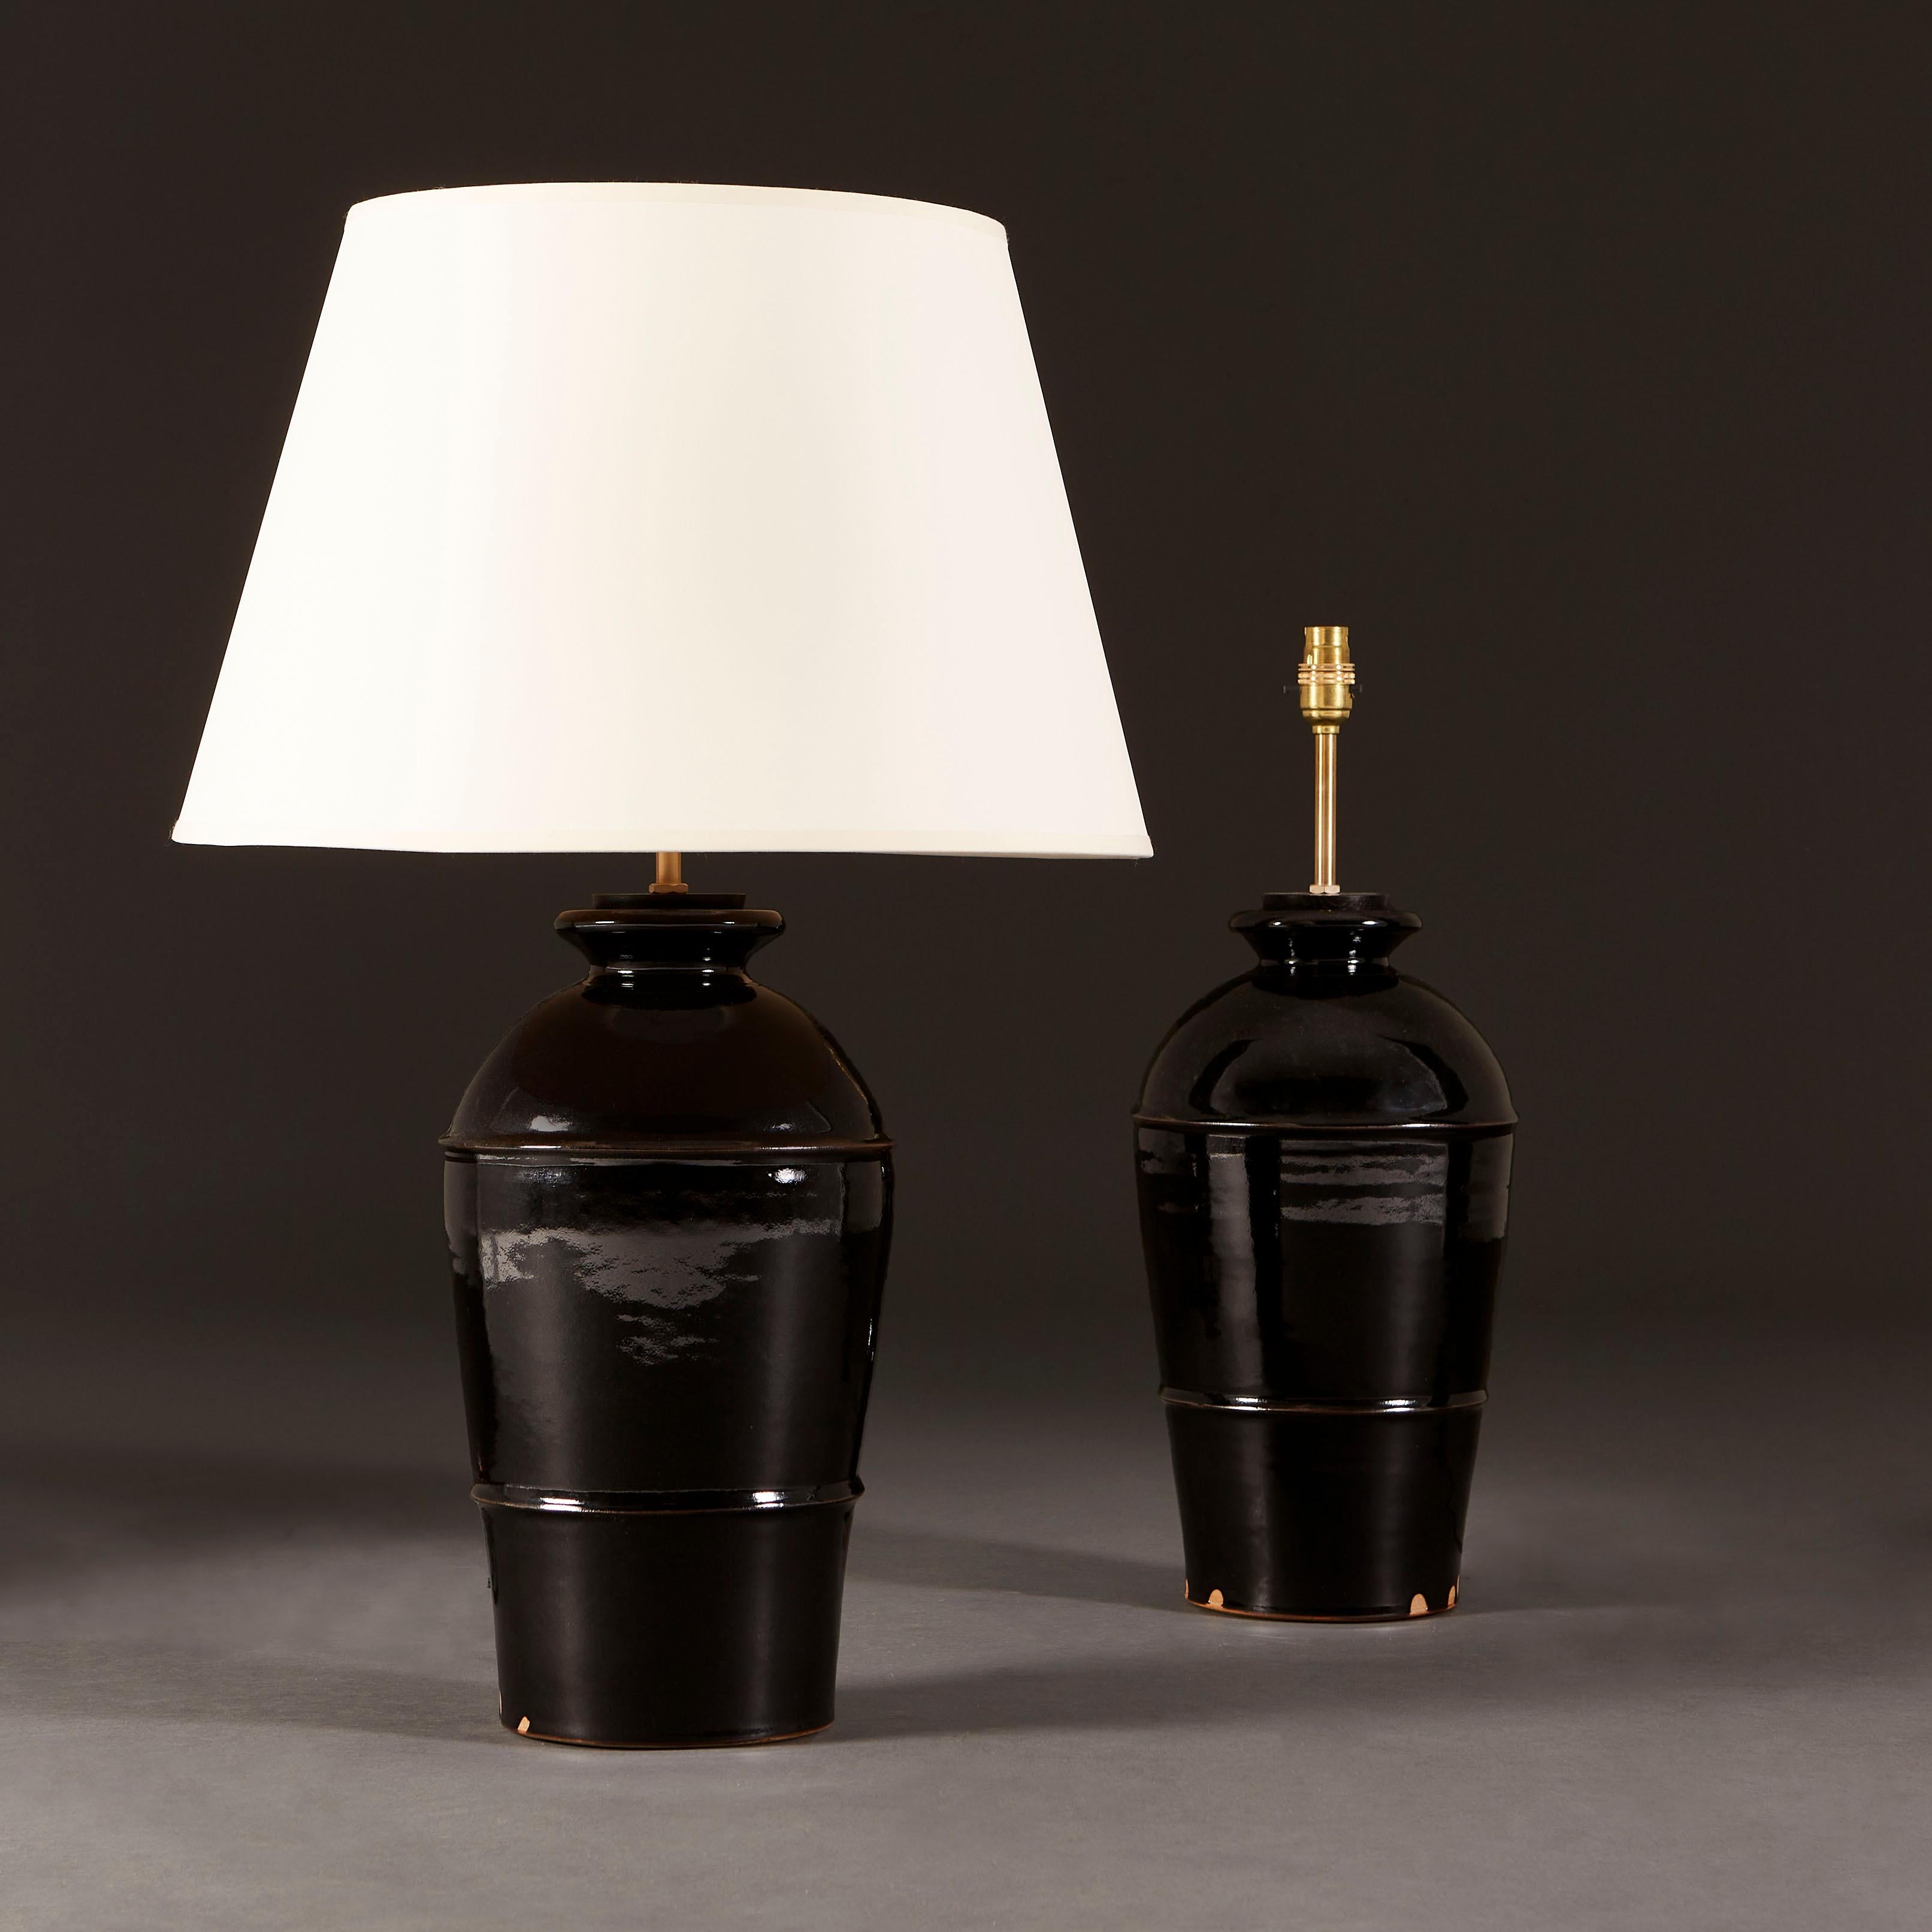 +VAT

England, modern

A pair of Song Dynasty style lamps of large baluster form, with glossy Tenmoku glaze, a term derived from Tenmoku tea-bowls in China. The jars are finished with a pickled oak stopper and polished brass fittings.

Lead time 12